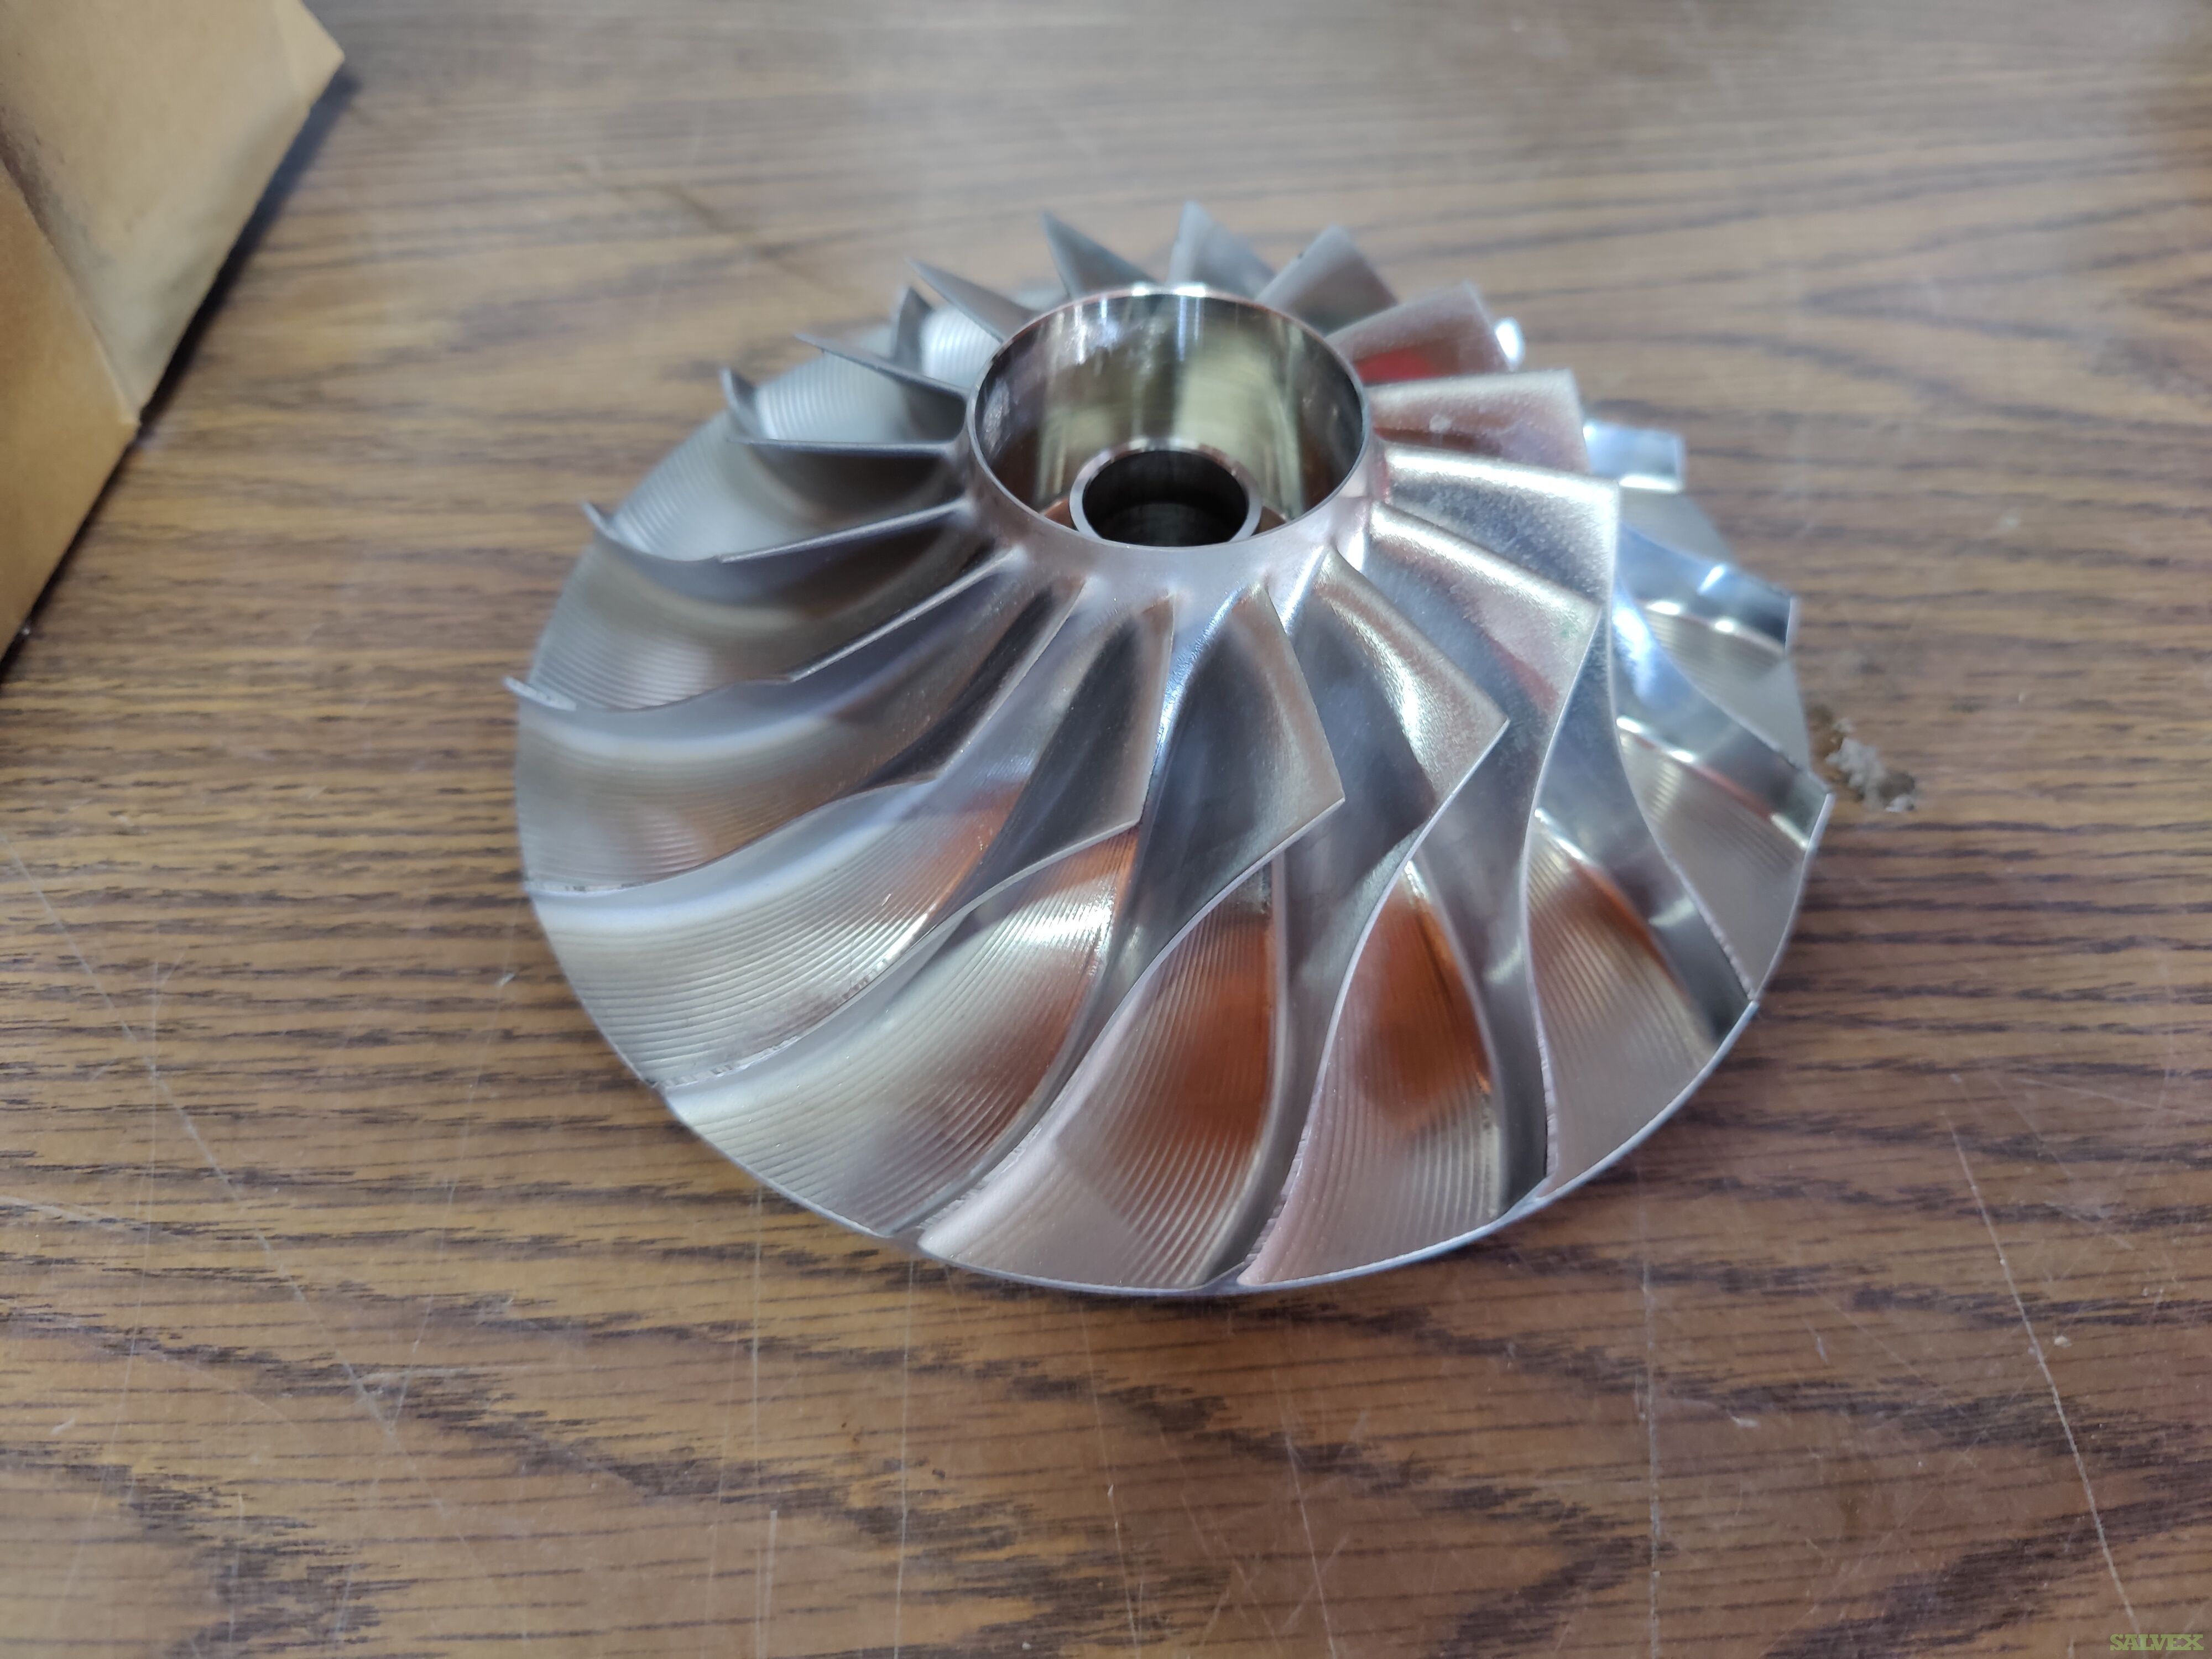 ROTOR PN: 3822018-2 in Unserviceable Condition (52 Units)